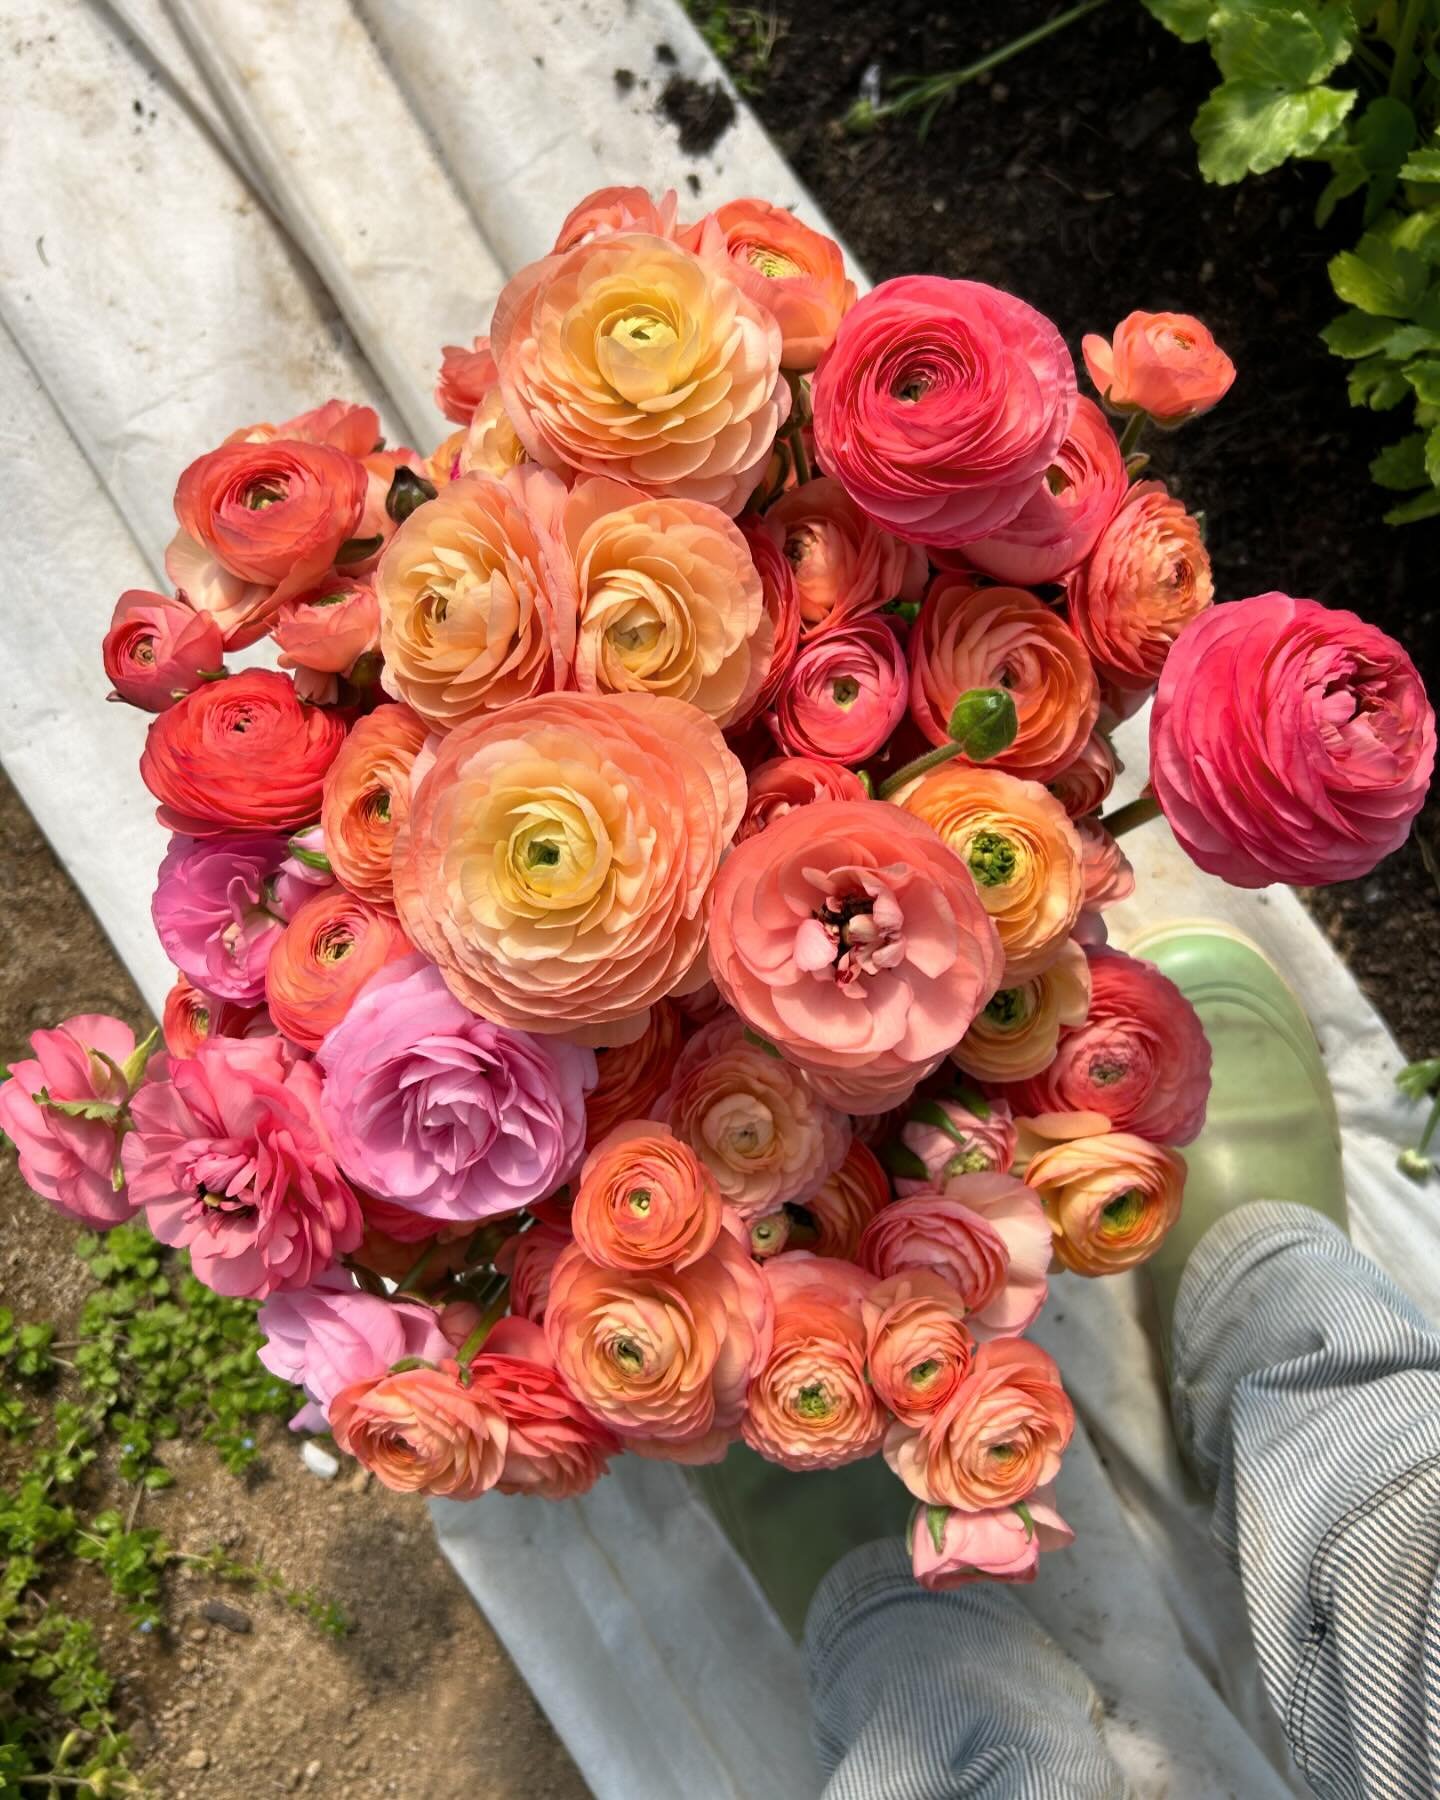 Some Monday things&hellip;..
We cut buckets of flowers all morning til it wasn&rsquo;t morning anymore&hellip; then we continued cutting. This warm weather makes the ranunculus blow wide open and show off their belly buttons. Yes, they still have ple